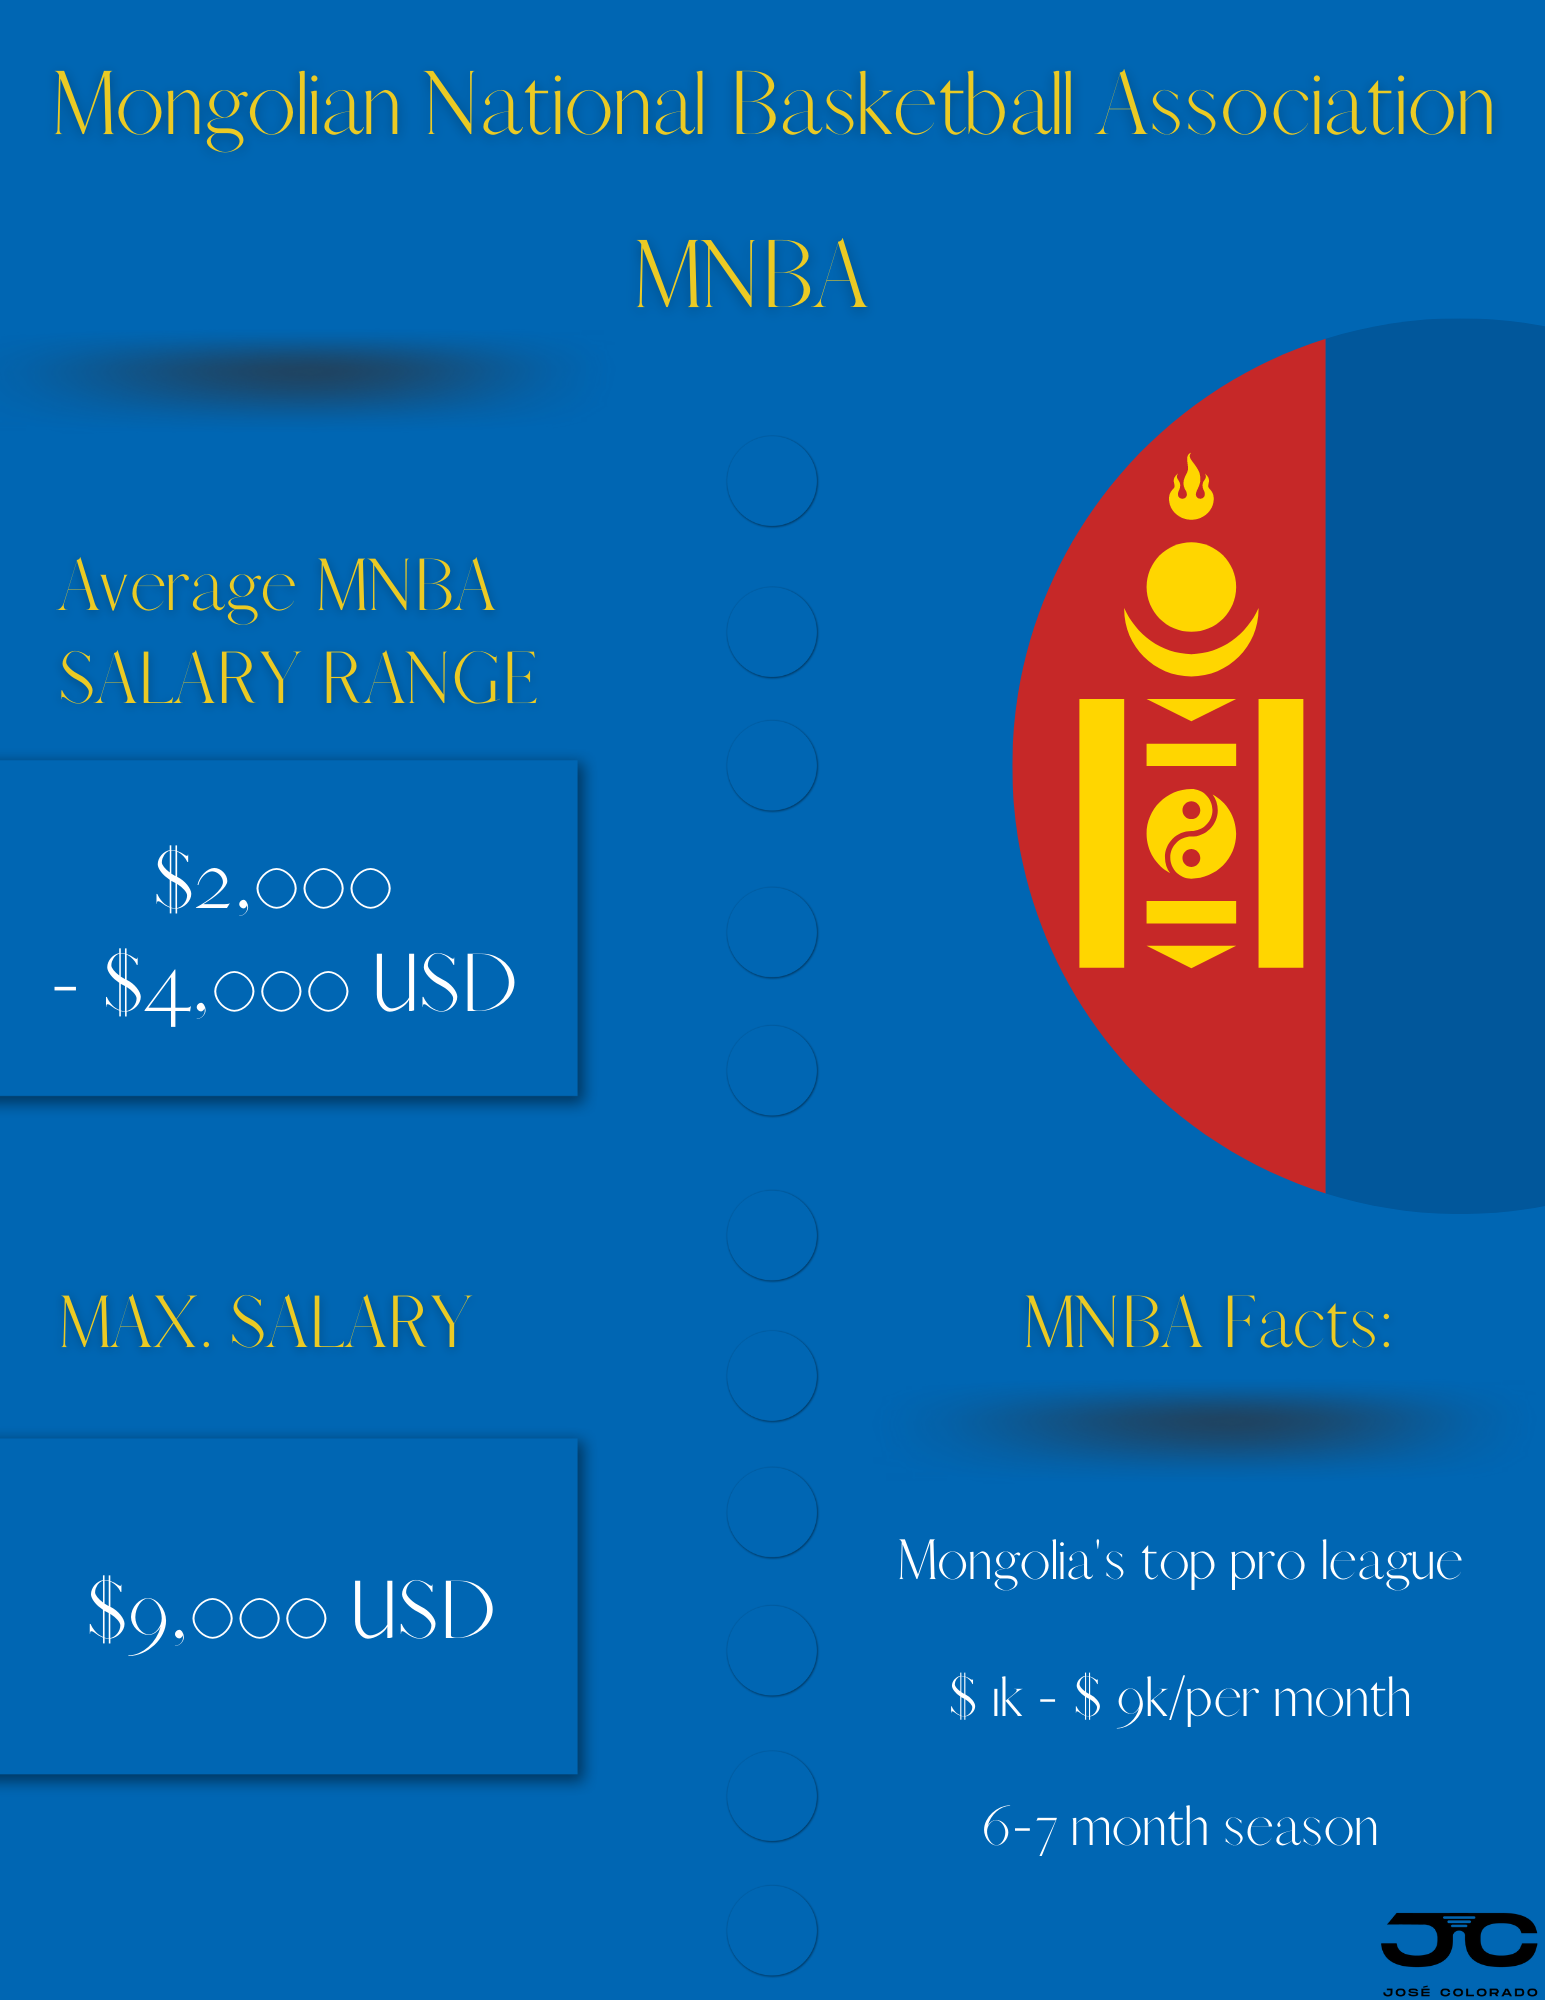 Mongolian basketball league salaries vary from $1,000 - $9,000 USD/per month in its top basketball league.